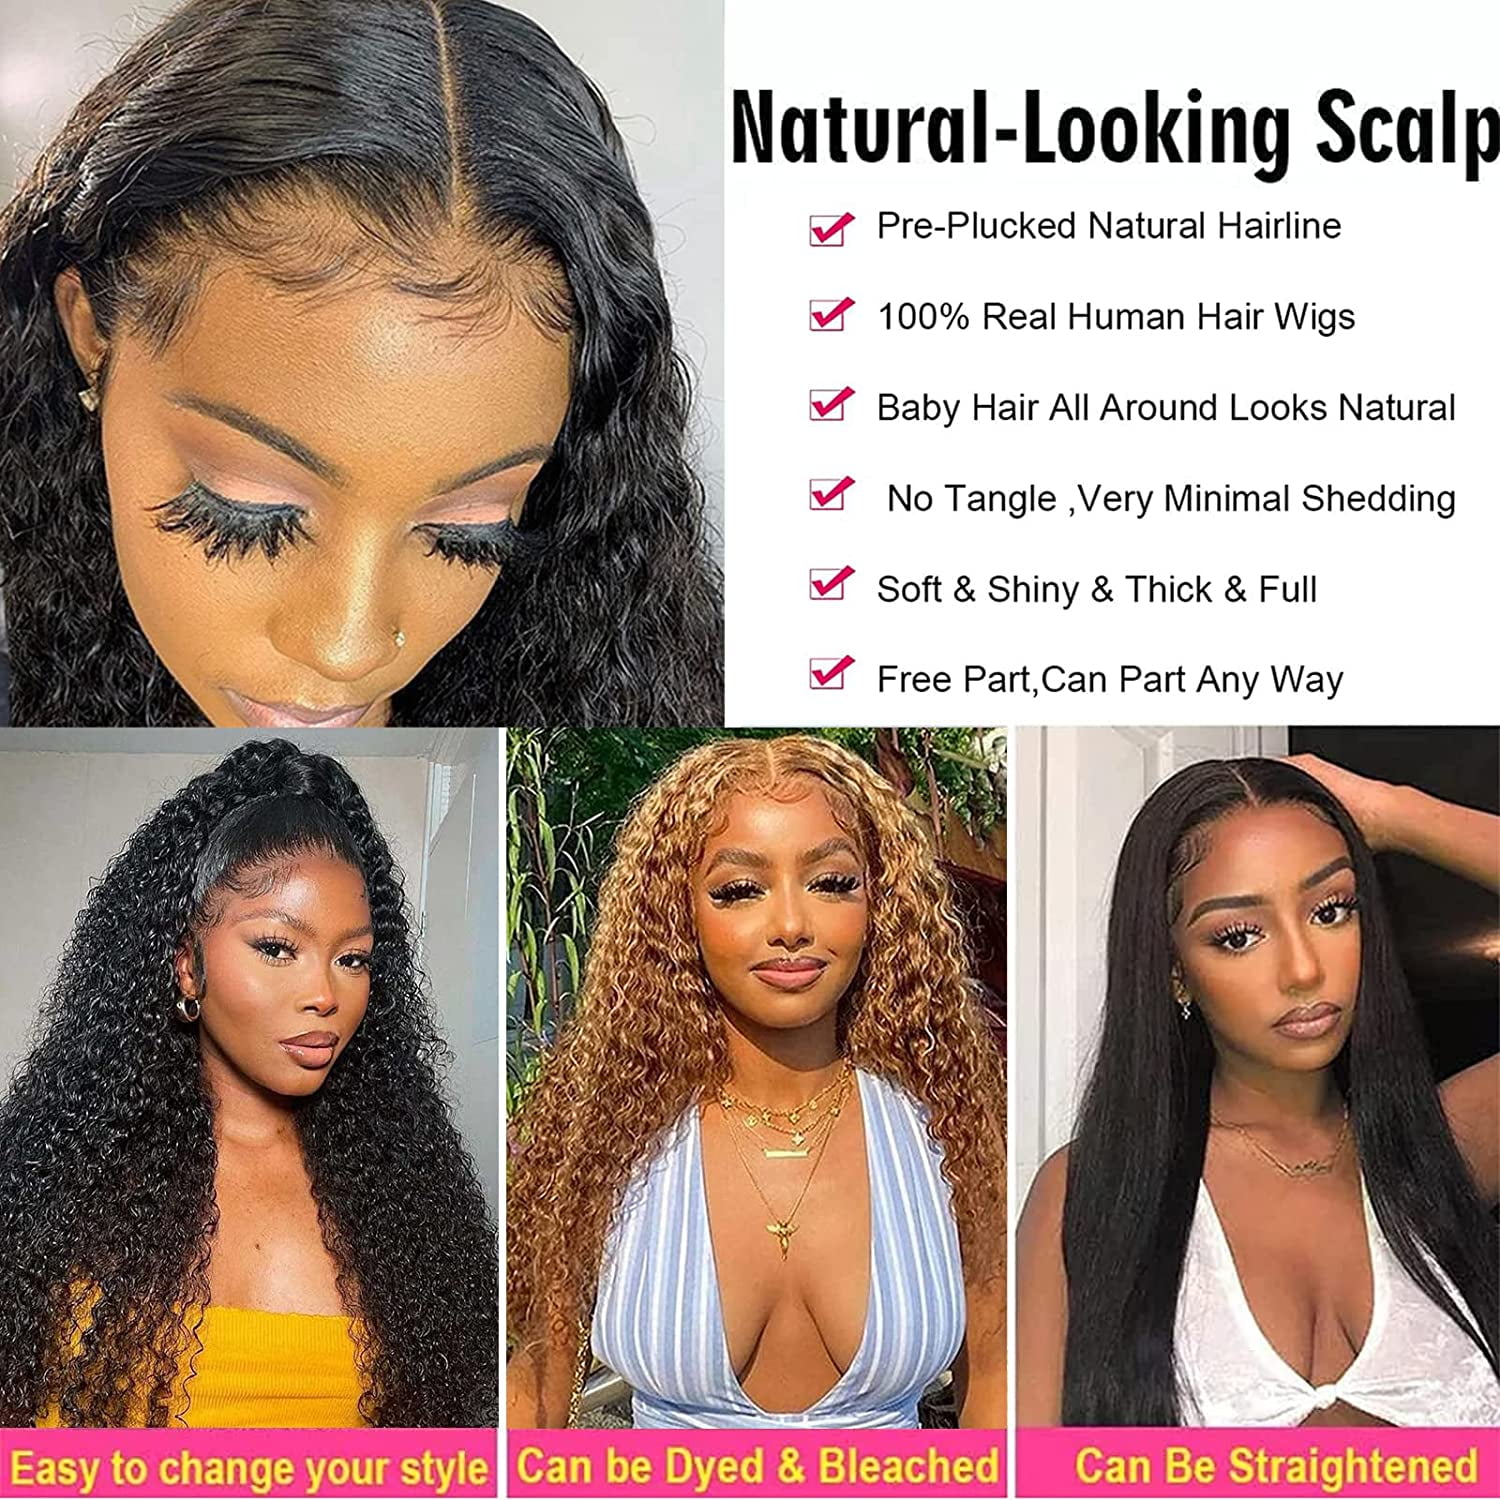  GUSYBG deep wave bob wig afro wigs for black women 13x6  frontal wig bob curly wig loose wave wig wigs for black women lace front  under 1 dollar items only 